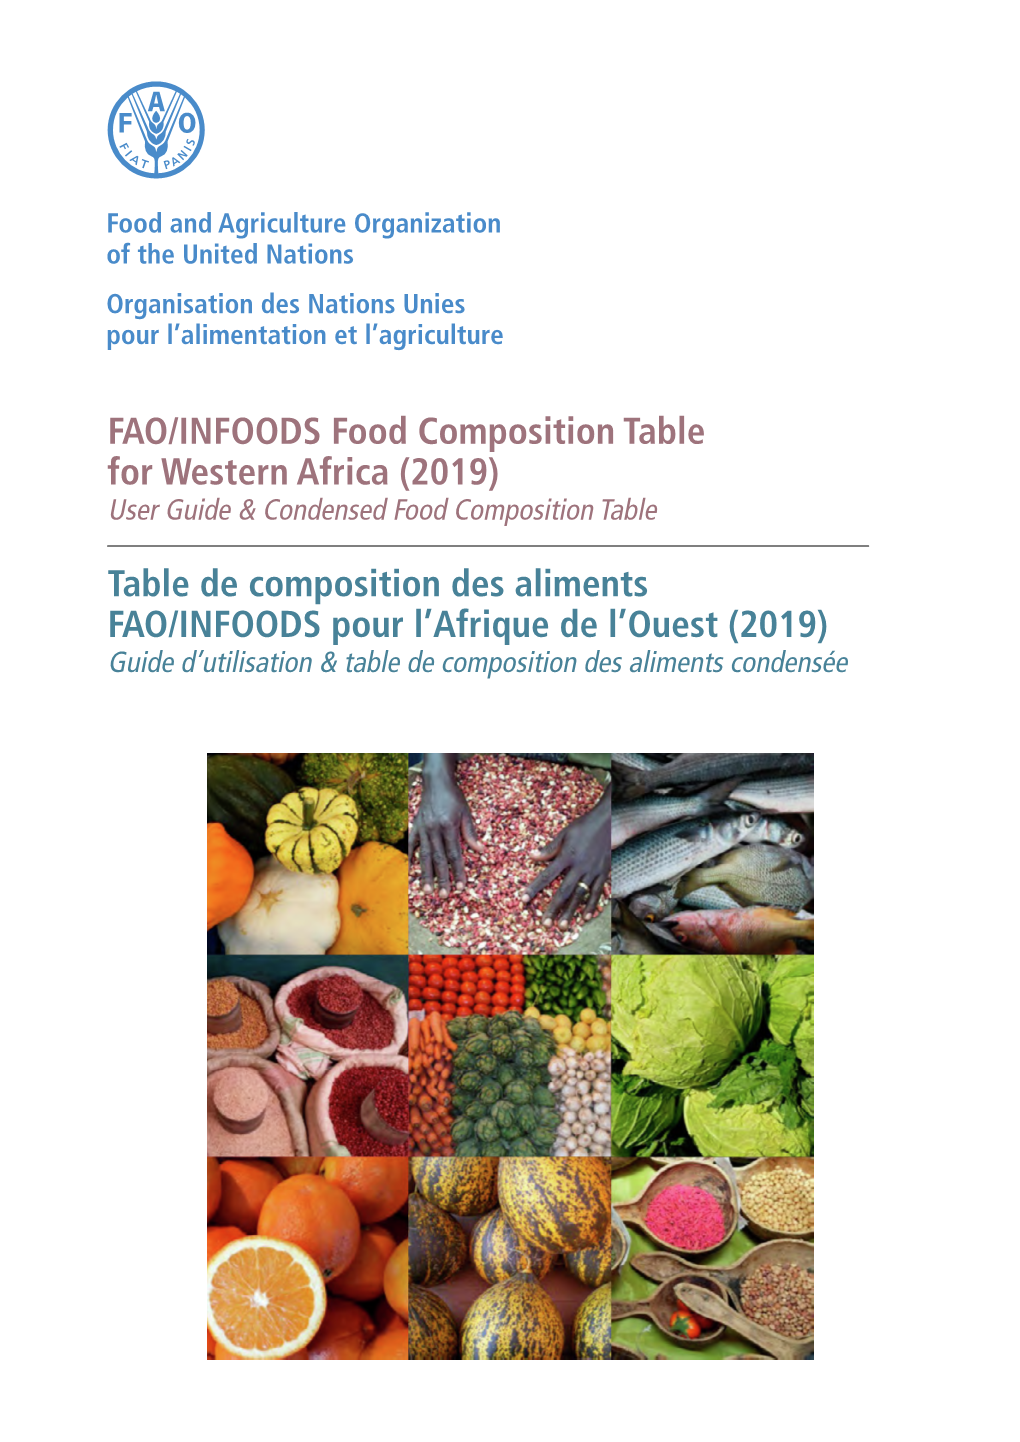 FAO/INFOODS Food Composition Table for Western Africa (2019) User Guide & Condensed Food Composition Table